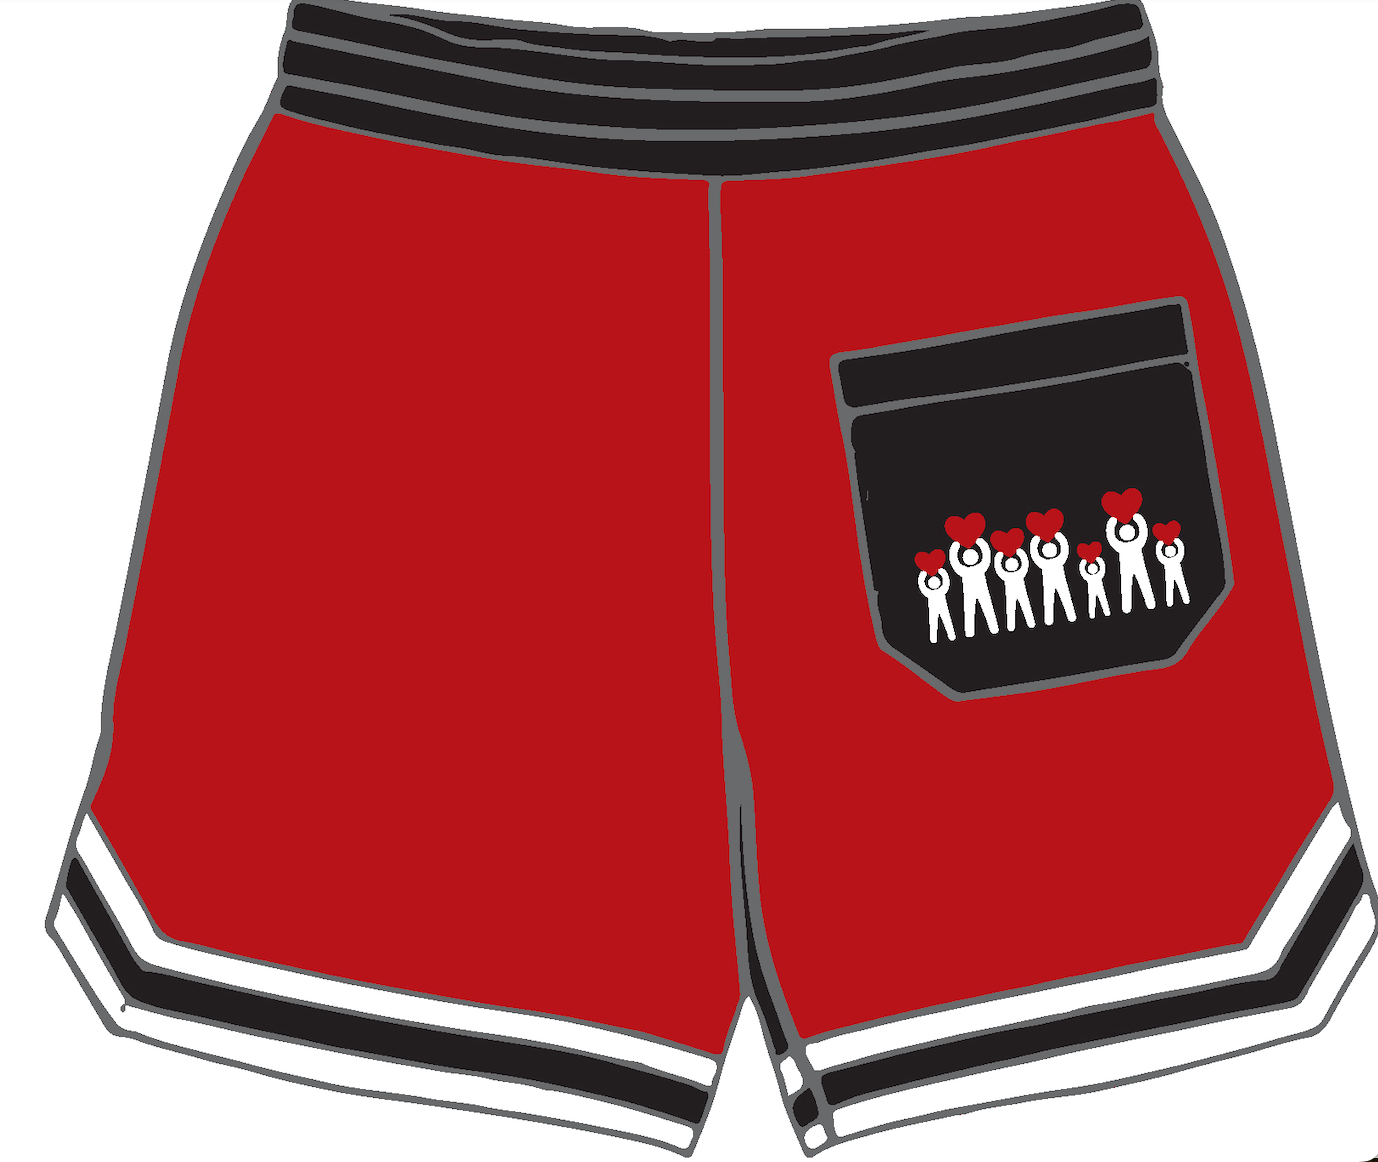 First Edition AC3 Red Mesh Shorts